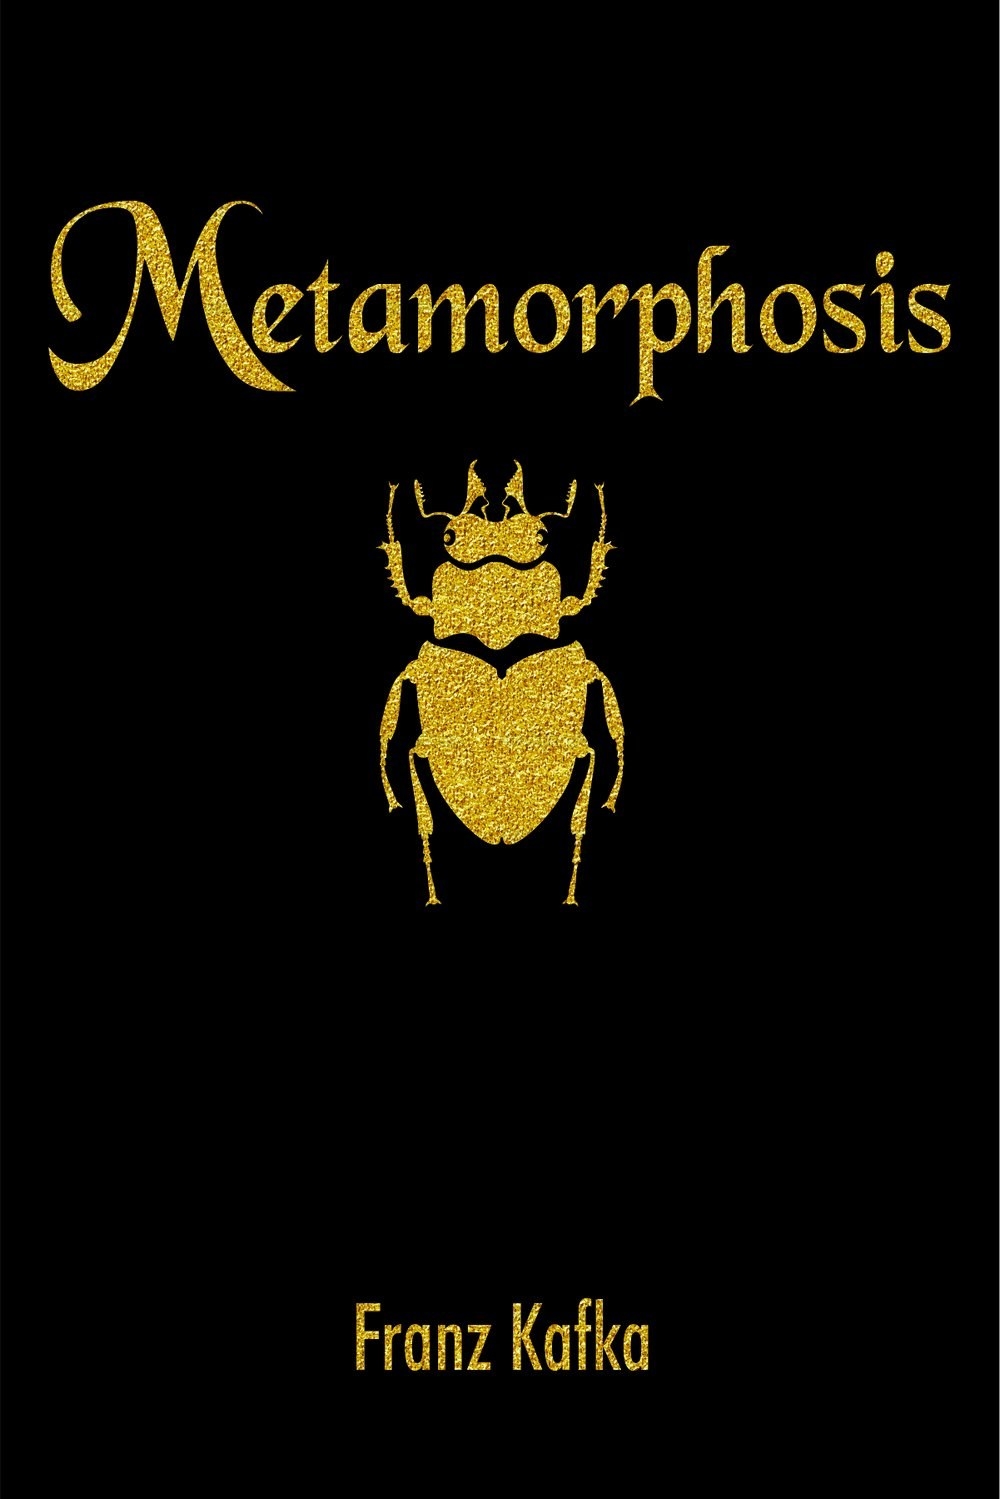 Cover of the book that has an insect on it 